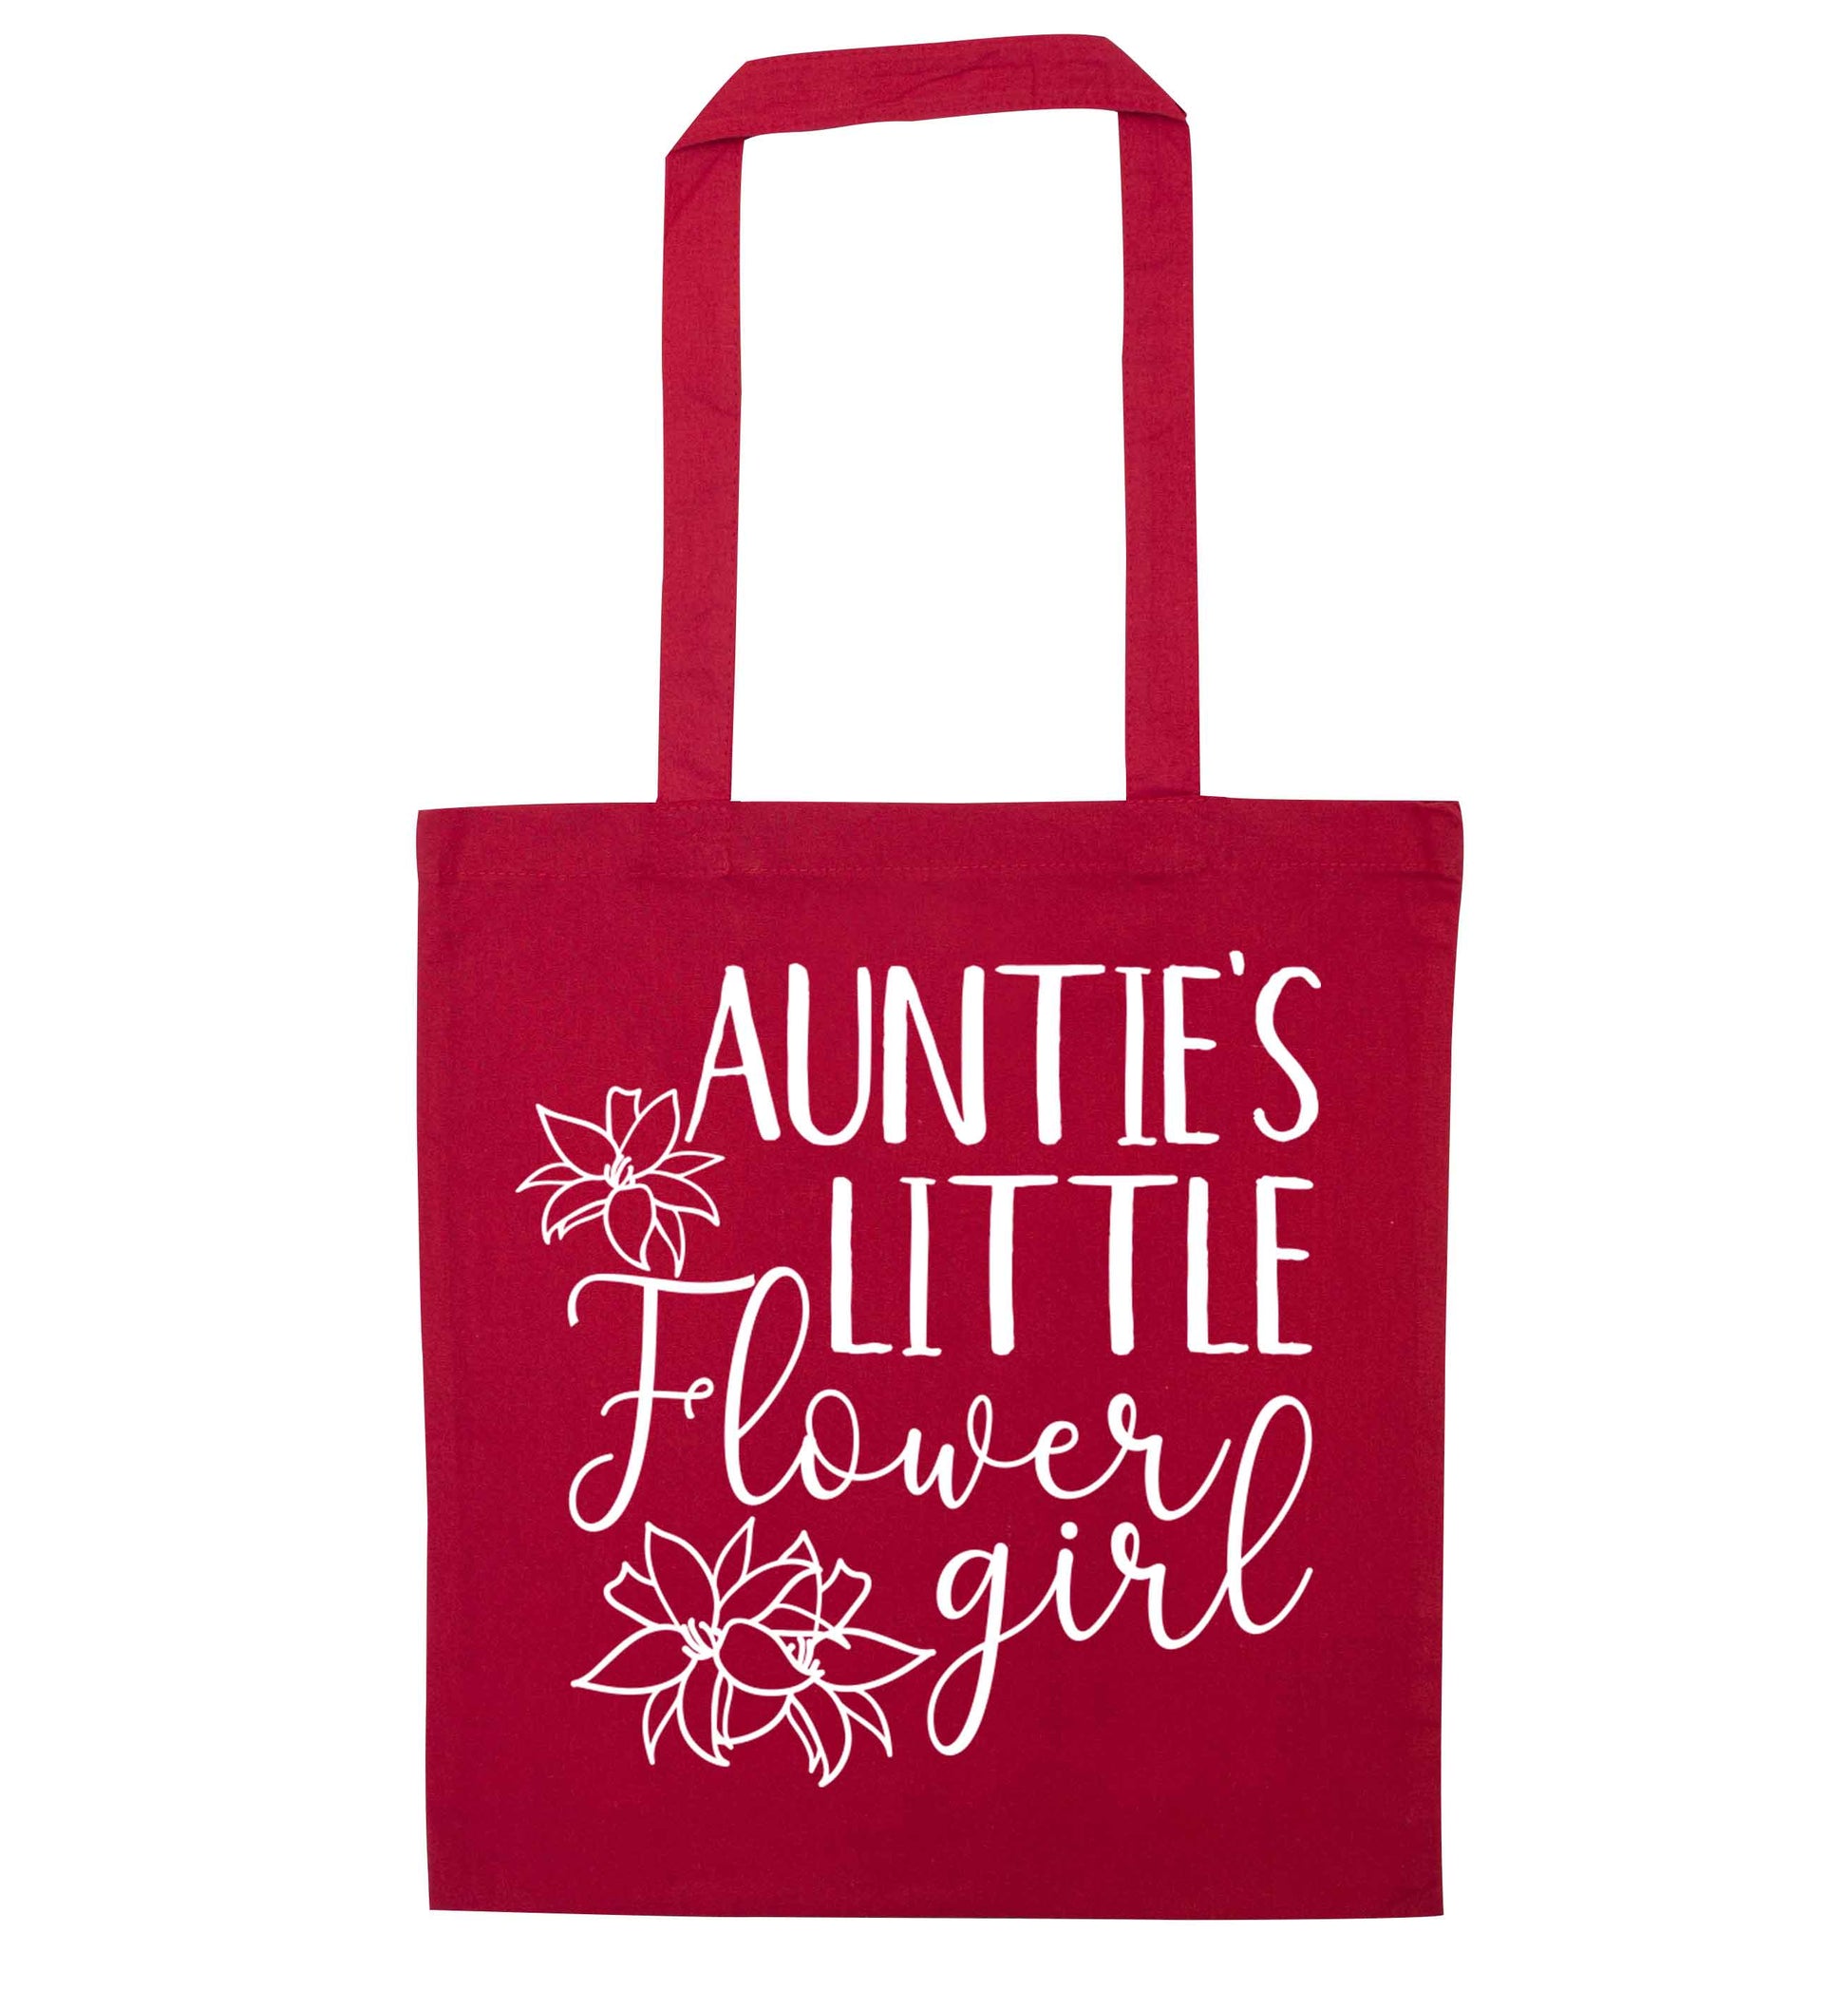 Perfect wedding guest favours or hen party gifts! Personalised bridal floral wreath designs, any name, any role! red tote bag